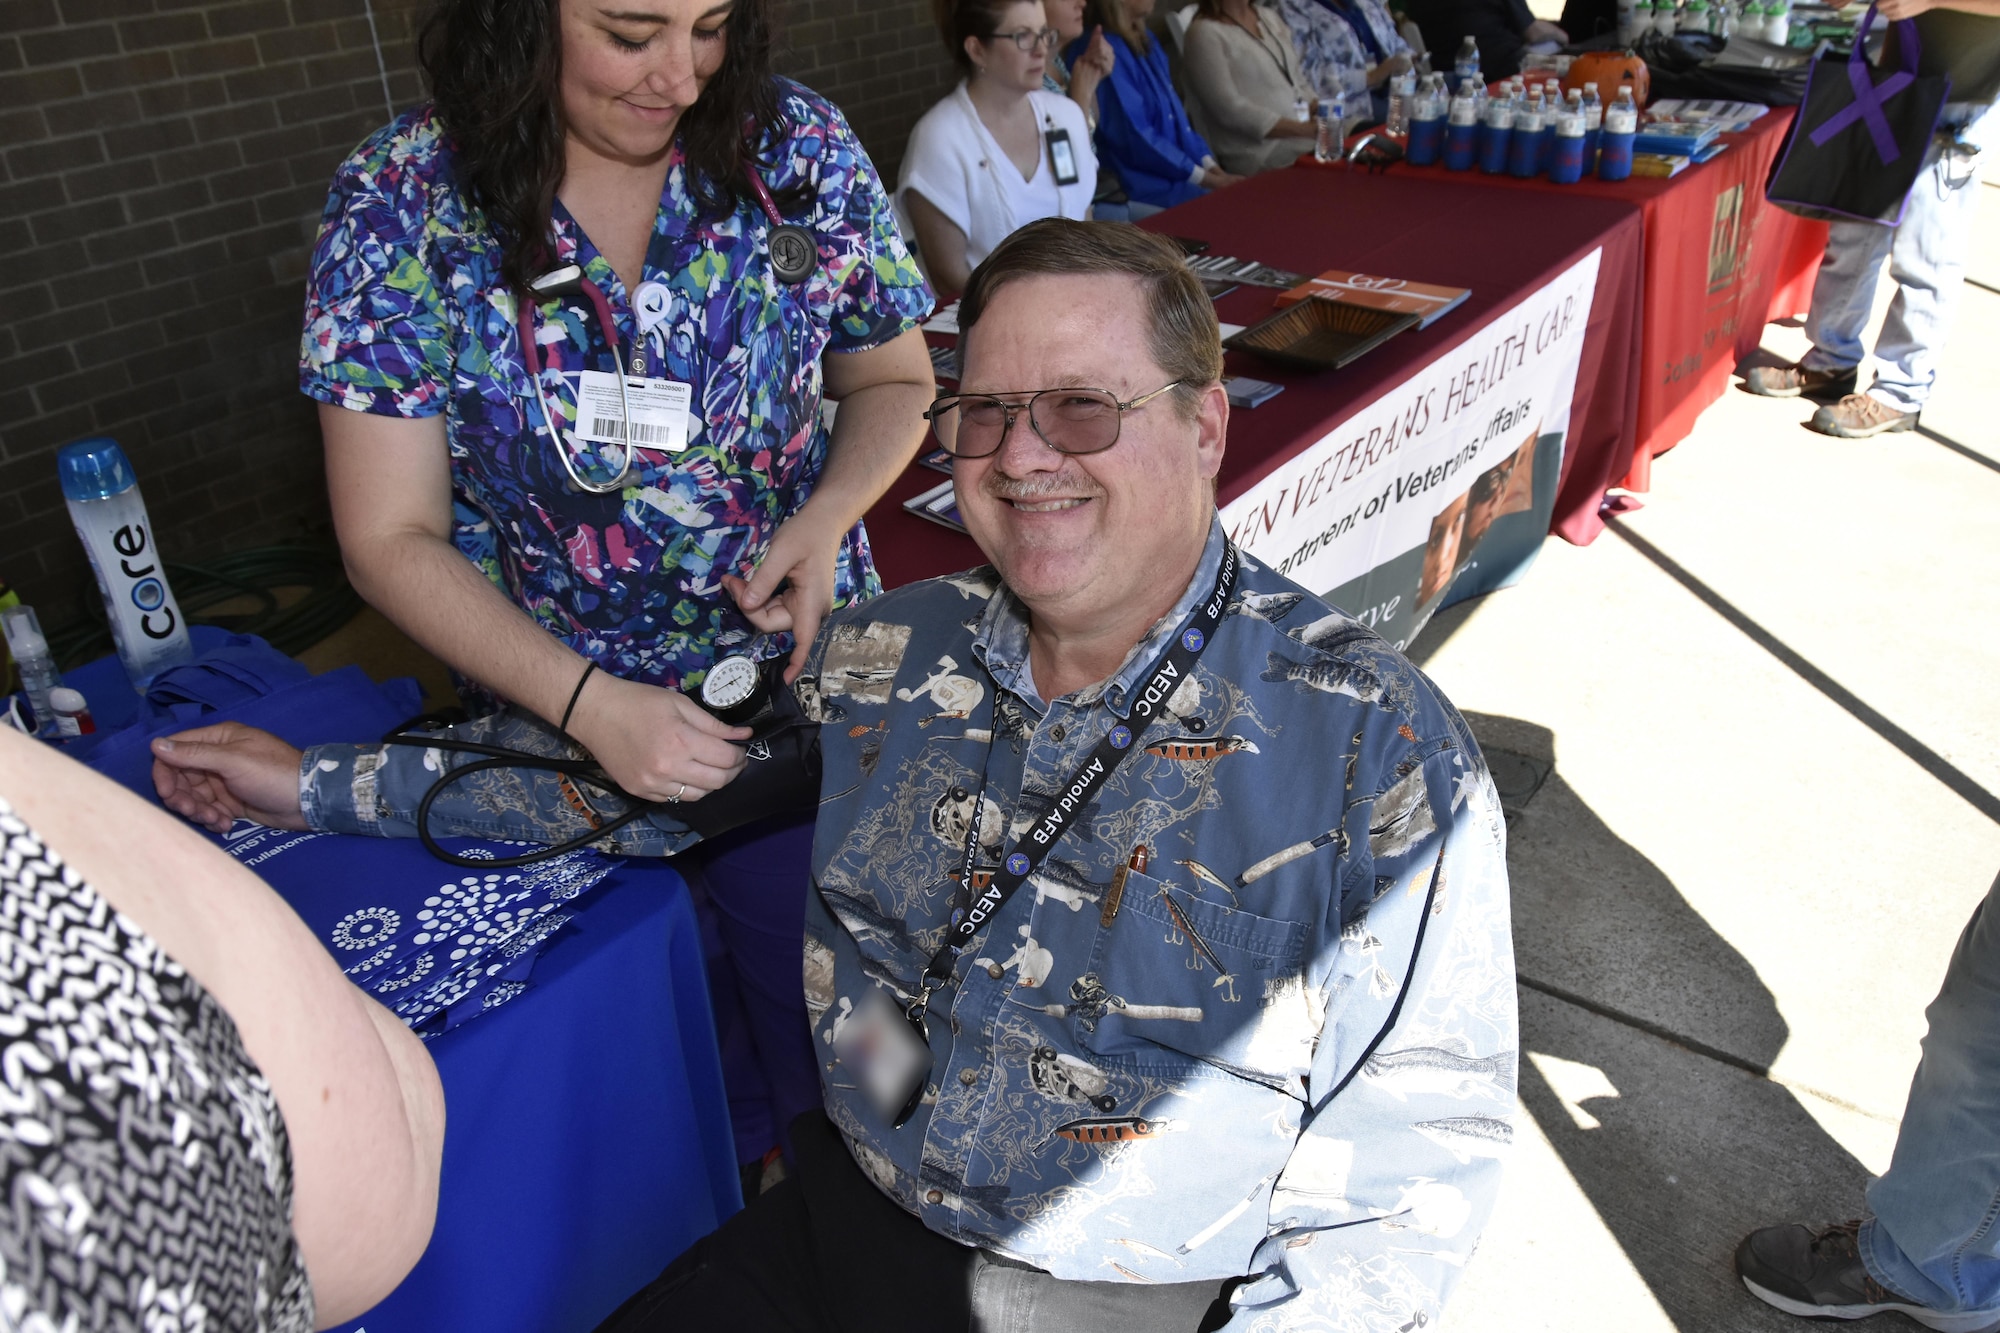 A healthcare professional takes the blood pressure of an AEDC team member, Michael Glennon, during the Arnold Air Force Base Community Health Fair Sept. 29 in front of the Arnold Air Force Base Exchange and Commissary. More than 10 healthcare exhibitors from several community partners to include the Coffee County Health Department, Veteran’s Affairs, Red Cross and Tennova Hospital, participated in the health fair. (U.S. Air Force photo/Rick Goodfriend) (This image was manipulated by obscuring badges for security purposes.)